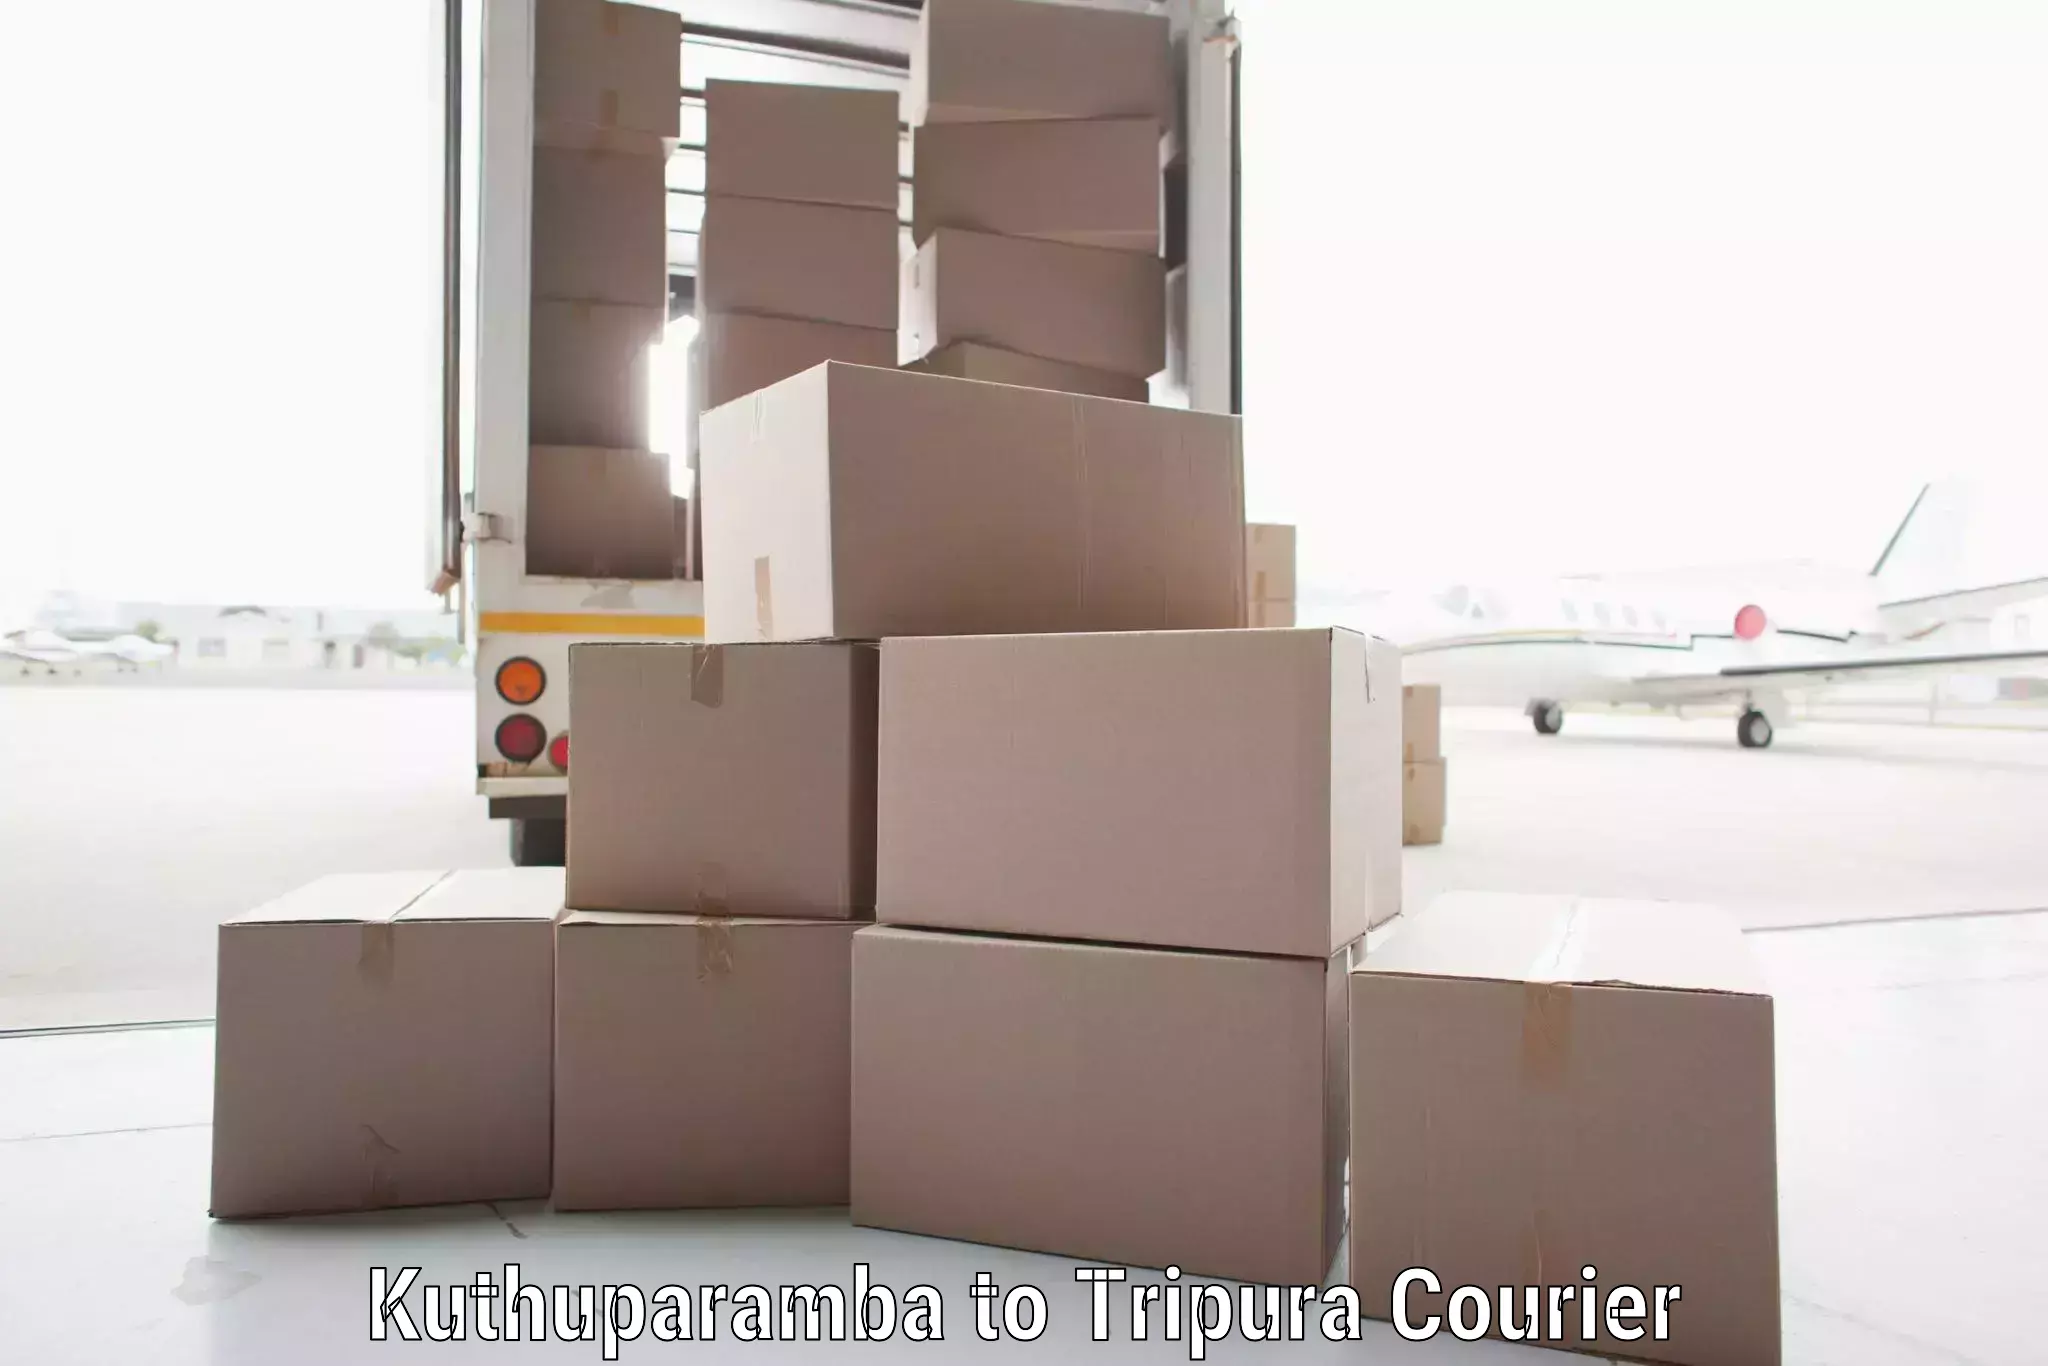 Quality courier services in Kuthuparamba to Udaipur Tripura